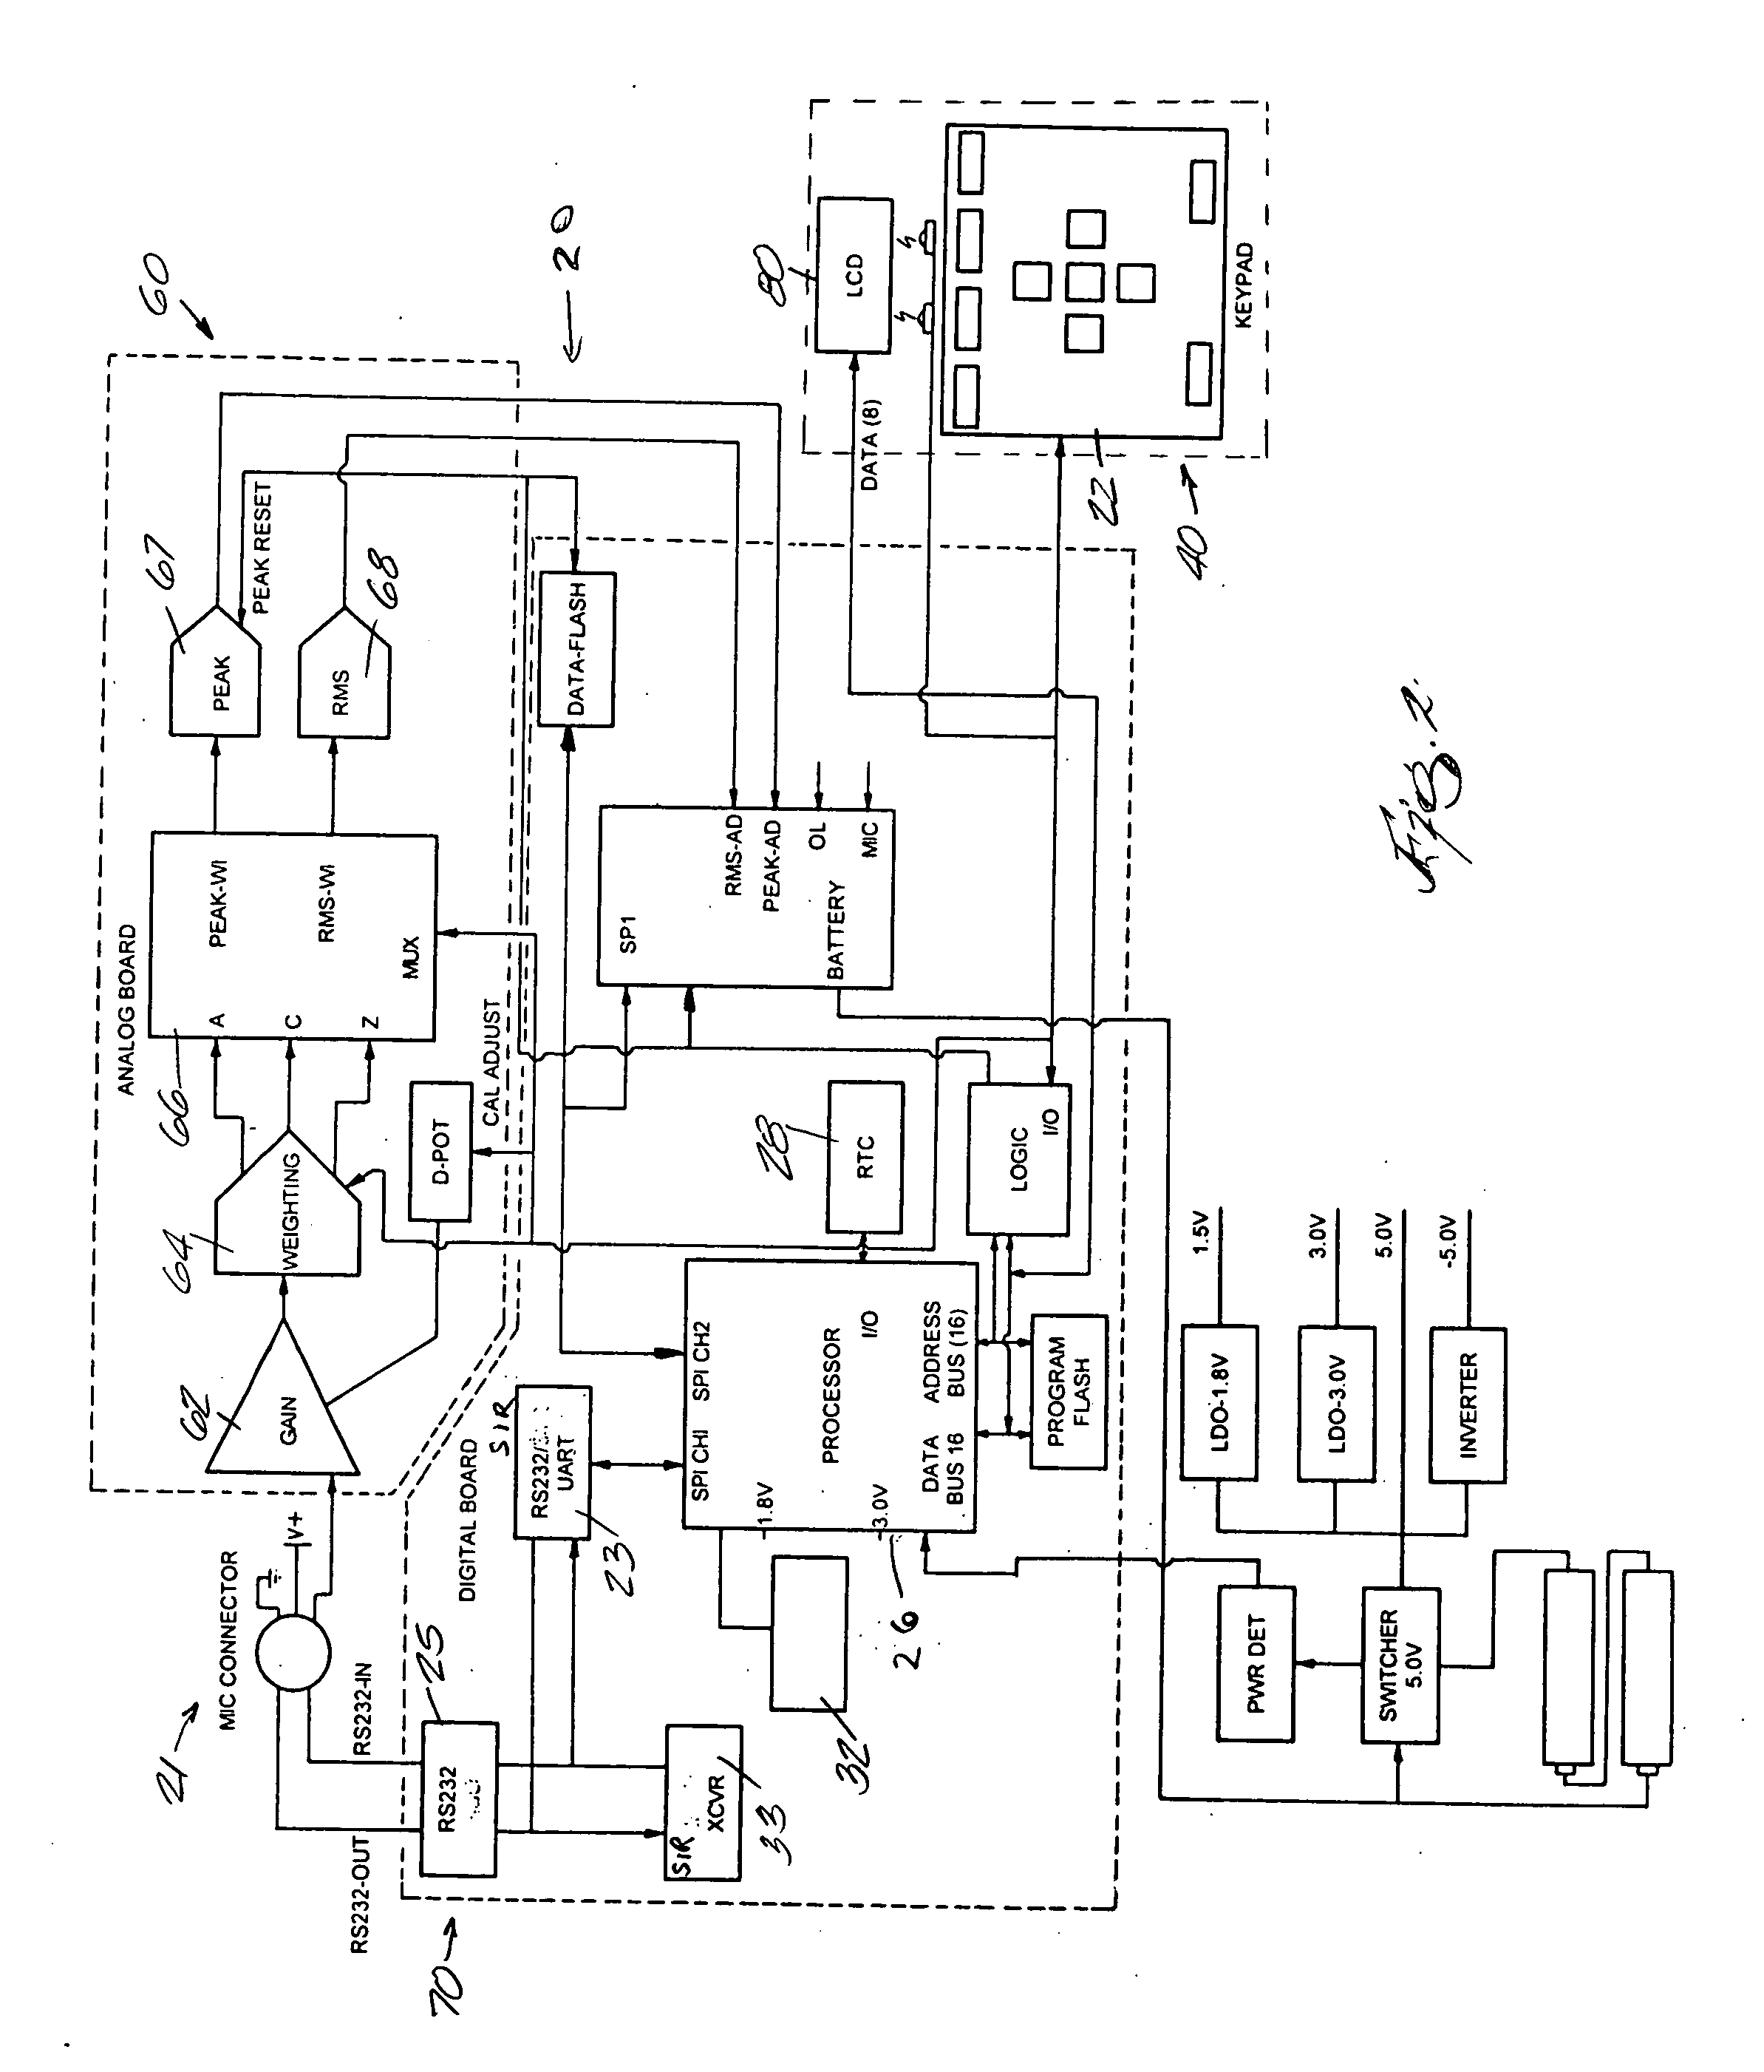 Noise exposure monitoring device